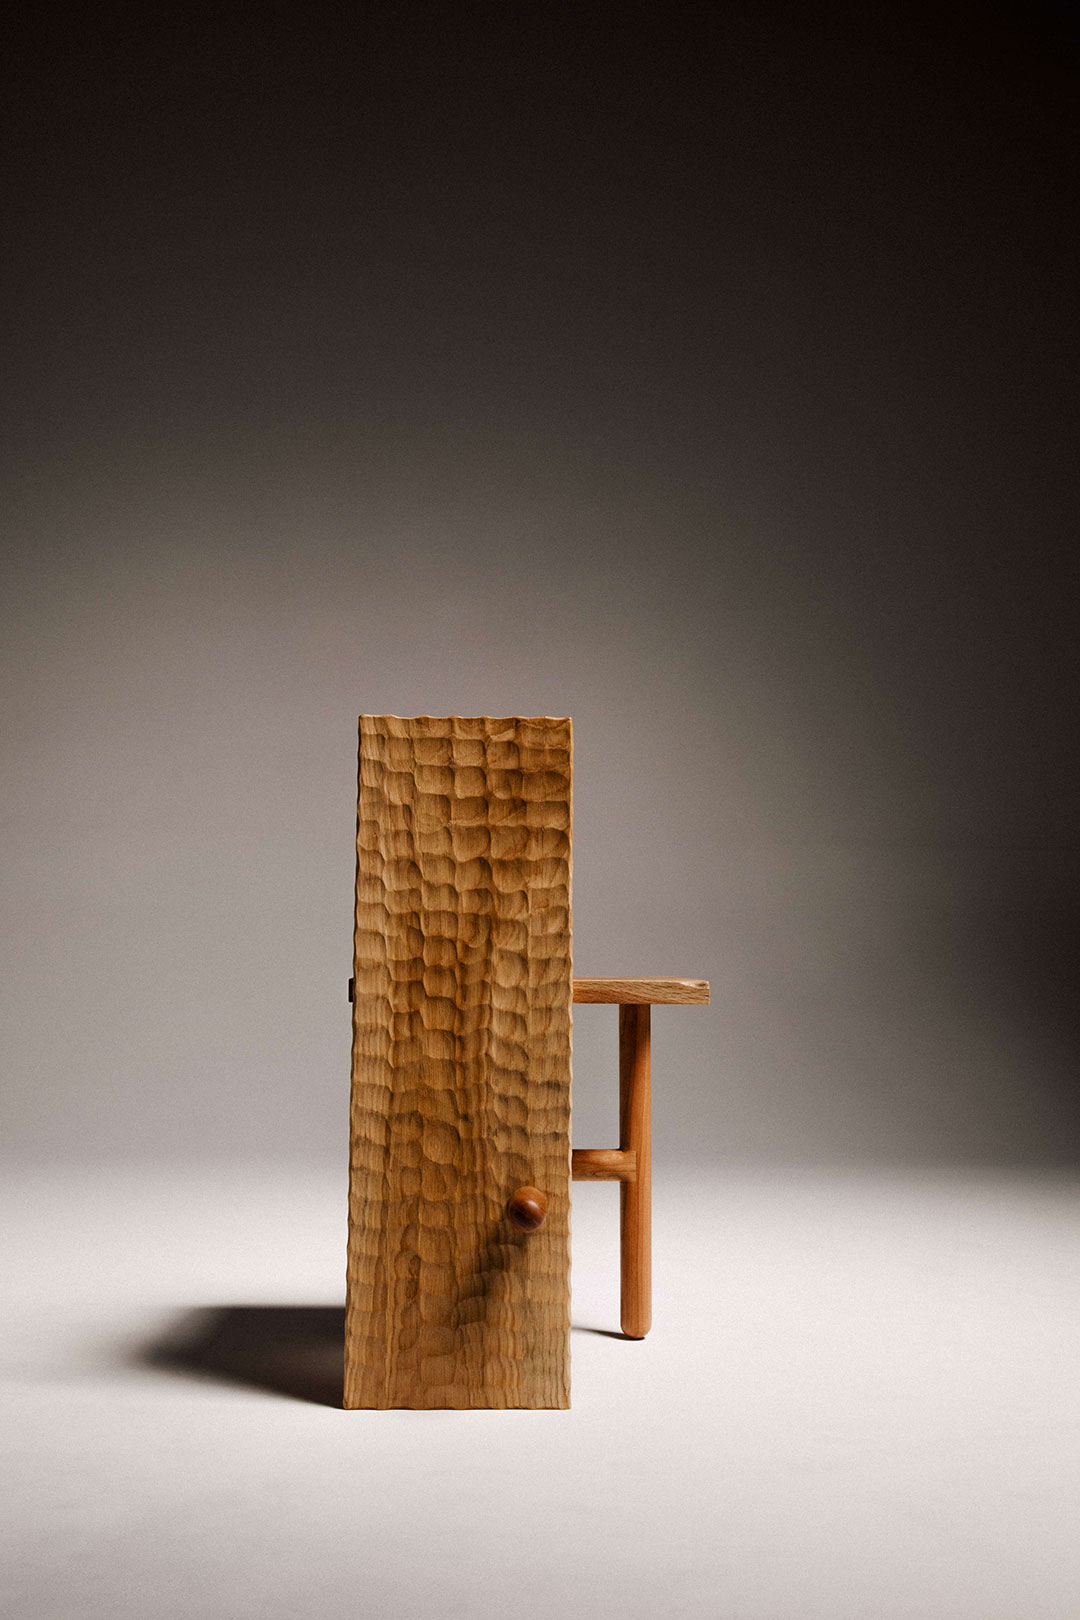 piece-quiet-a-series-of-decoupe-chairs-by-nathaniel-wojtalik